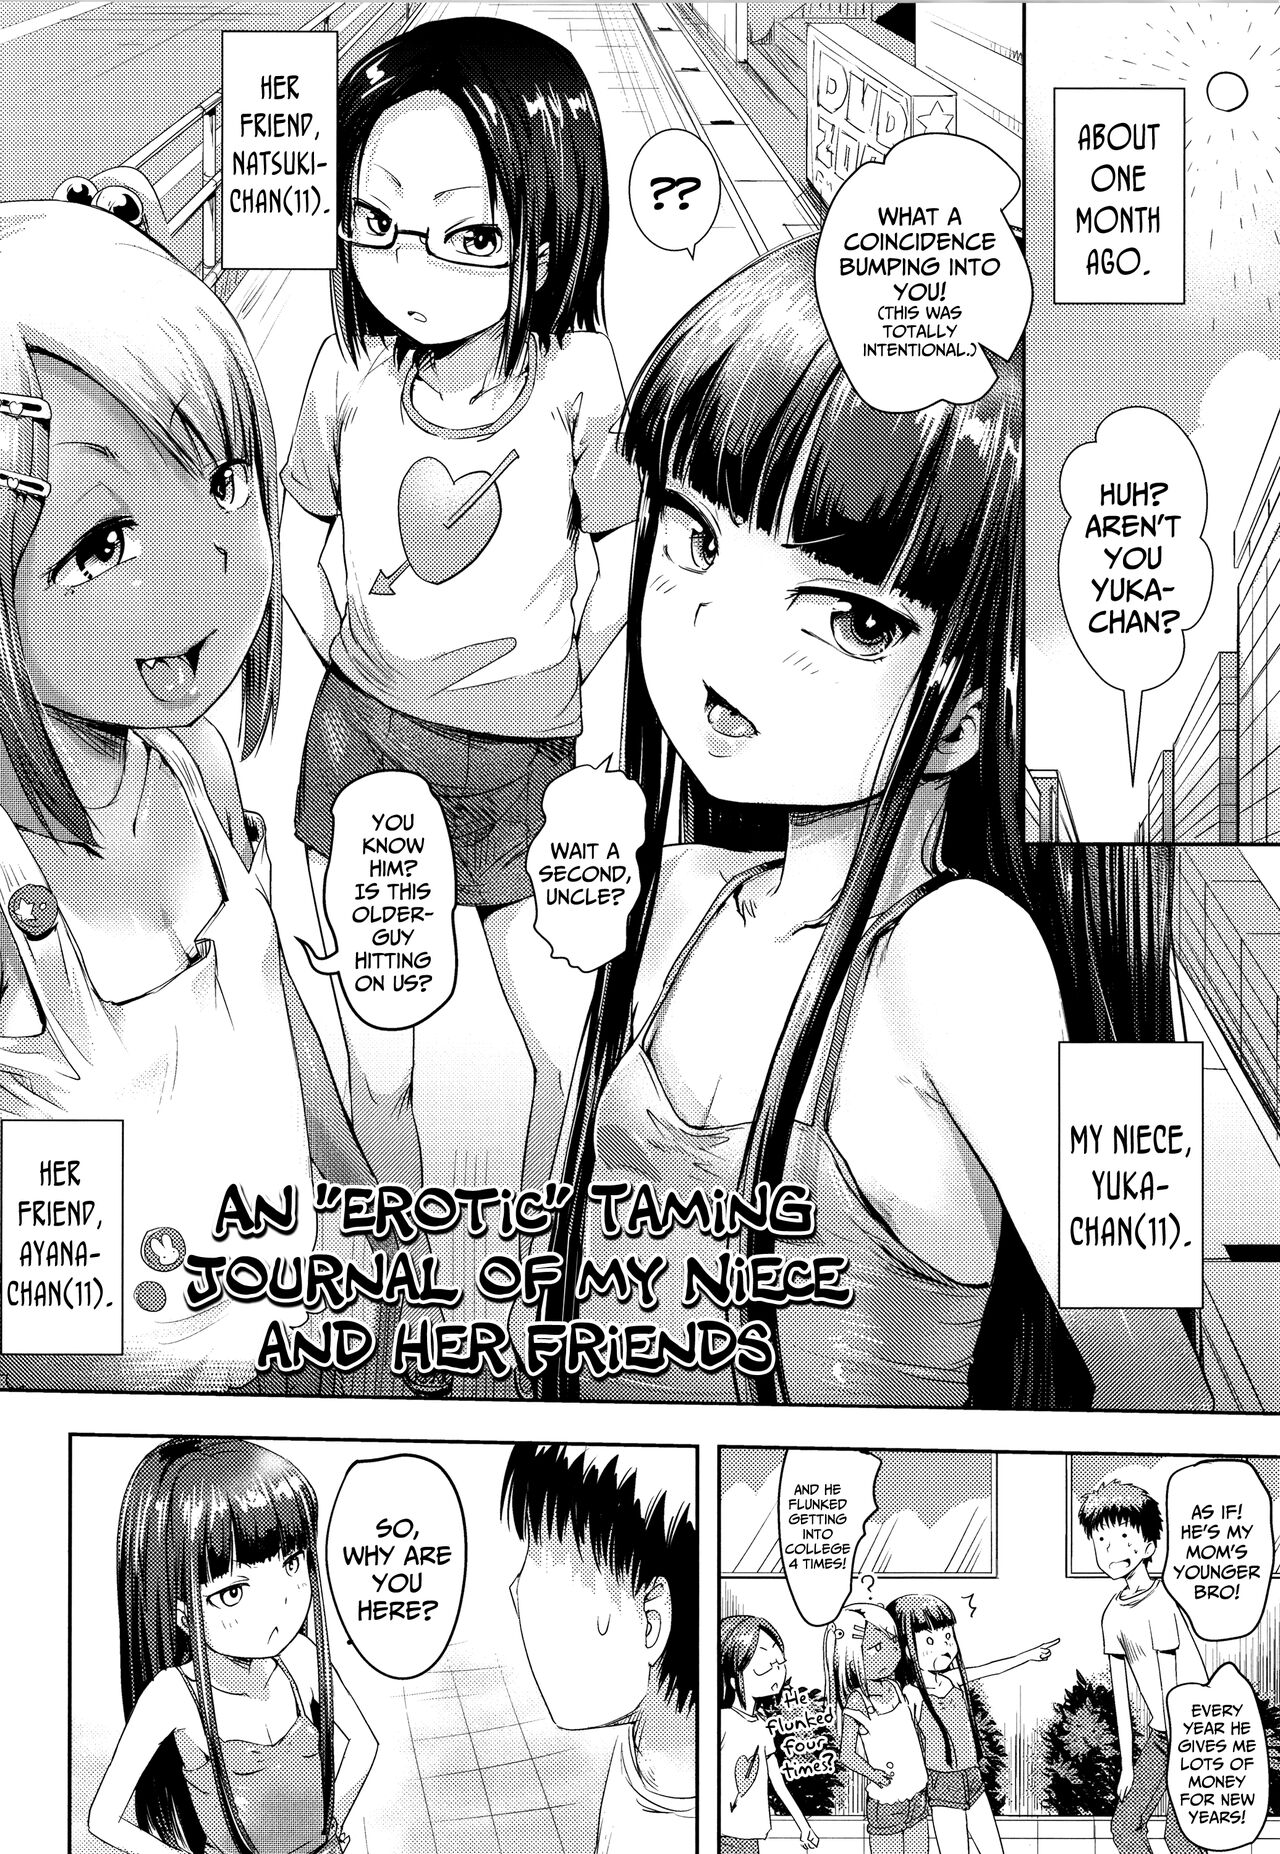 Hentai Manga Comic-An "Erotic" Taming Journal of my Niece and Her Friends-Read-2